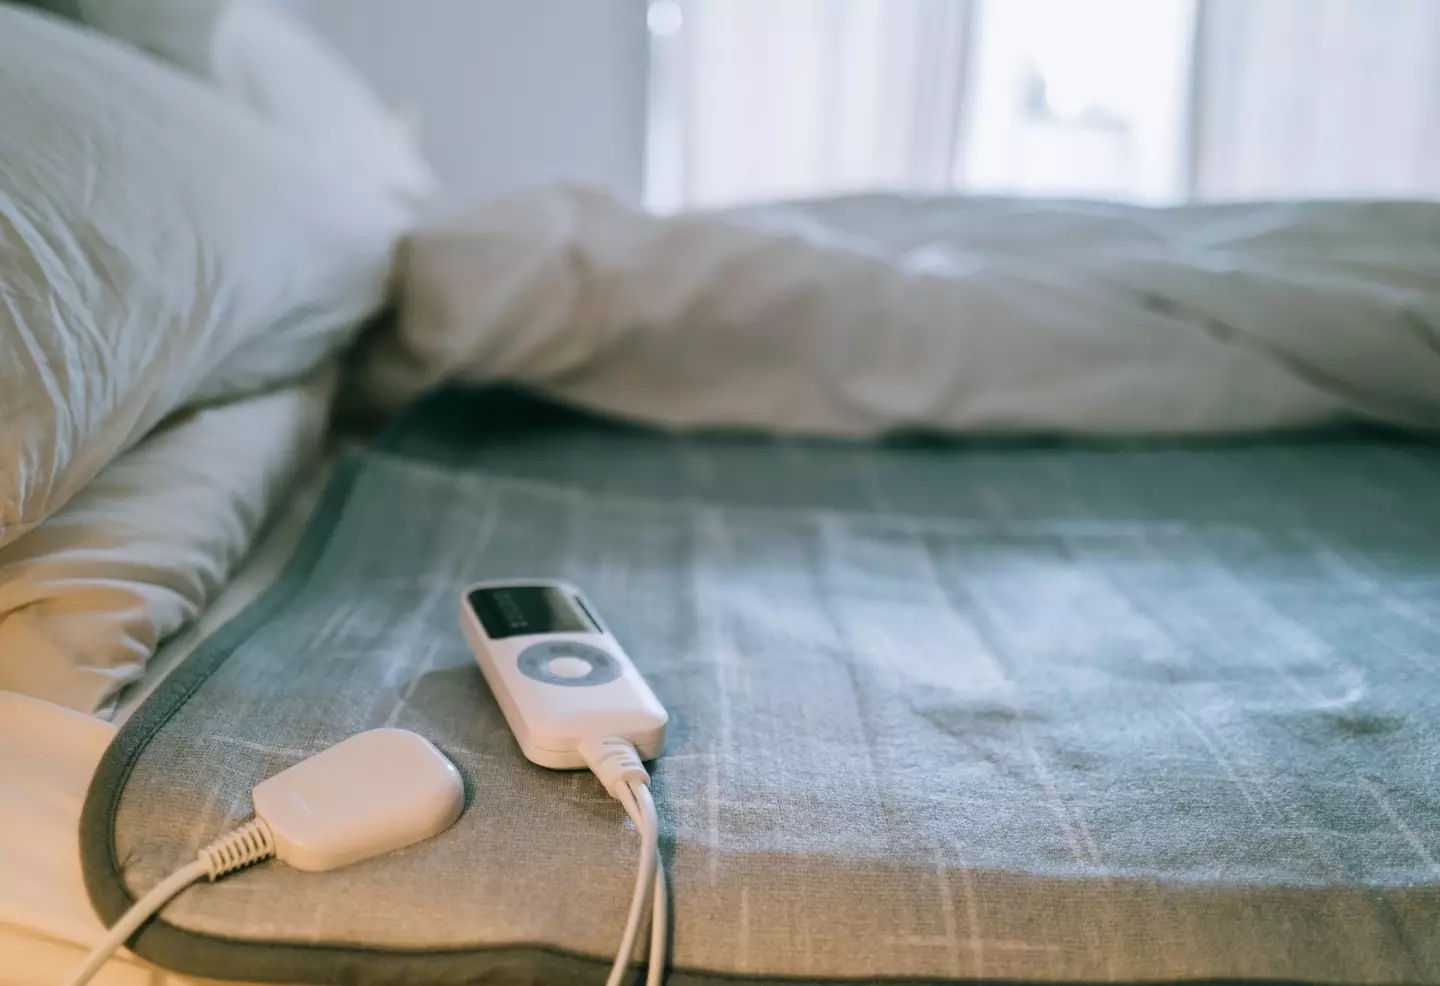 Plugging in a heated blanket could cost you just 2p per hour.